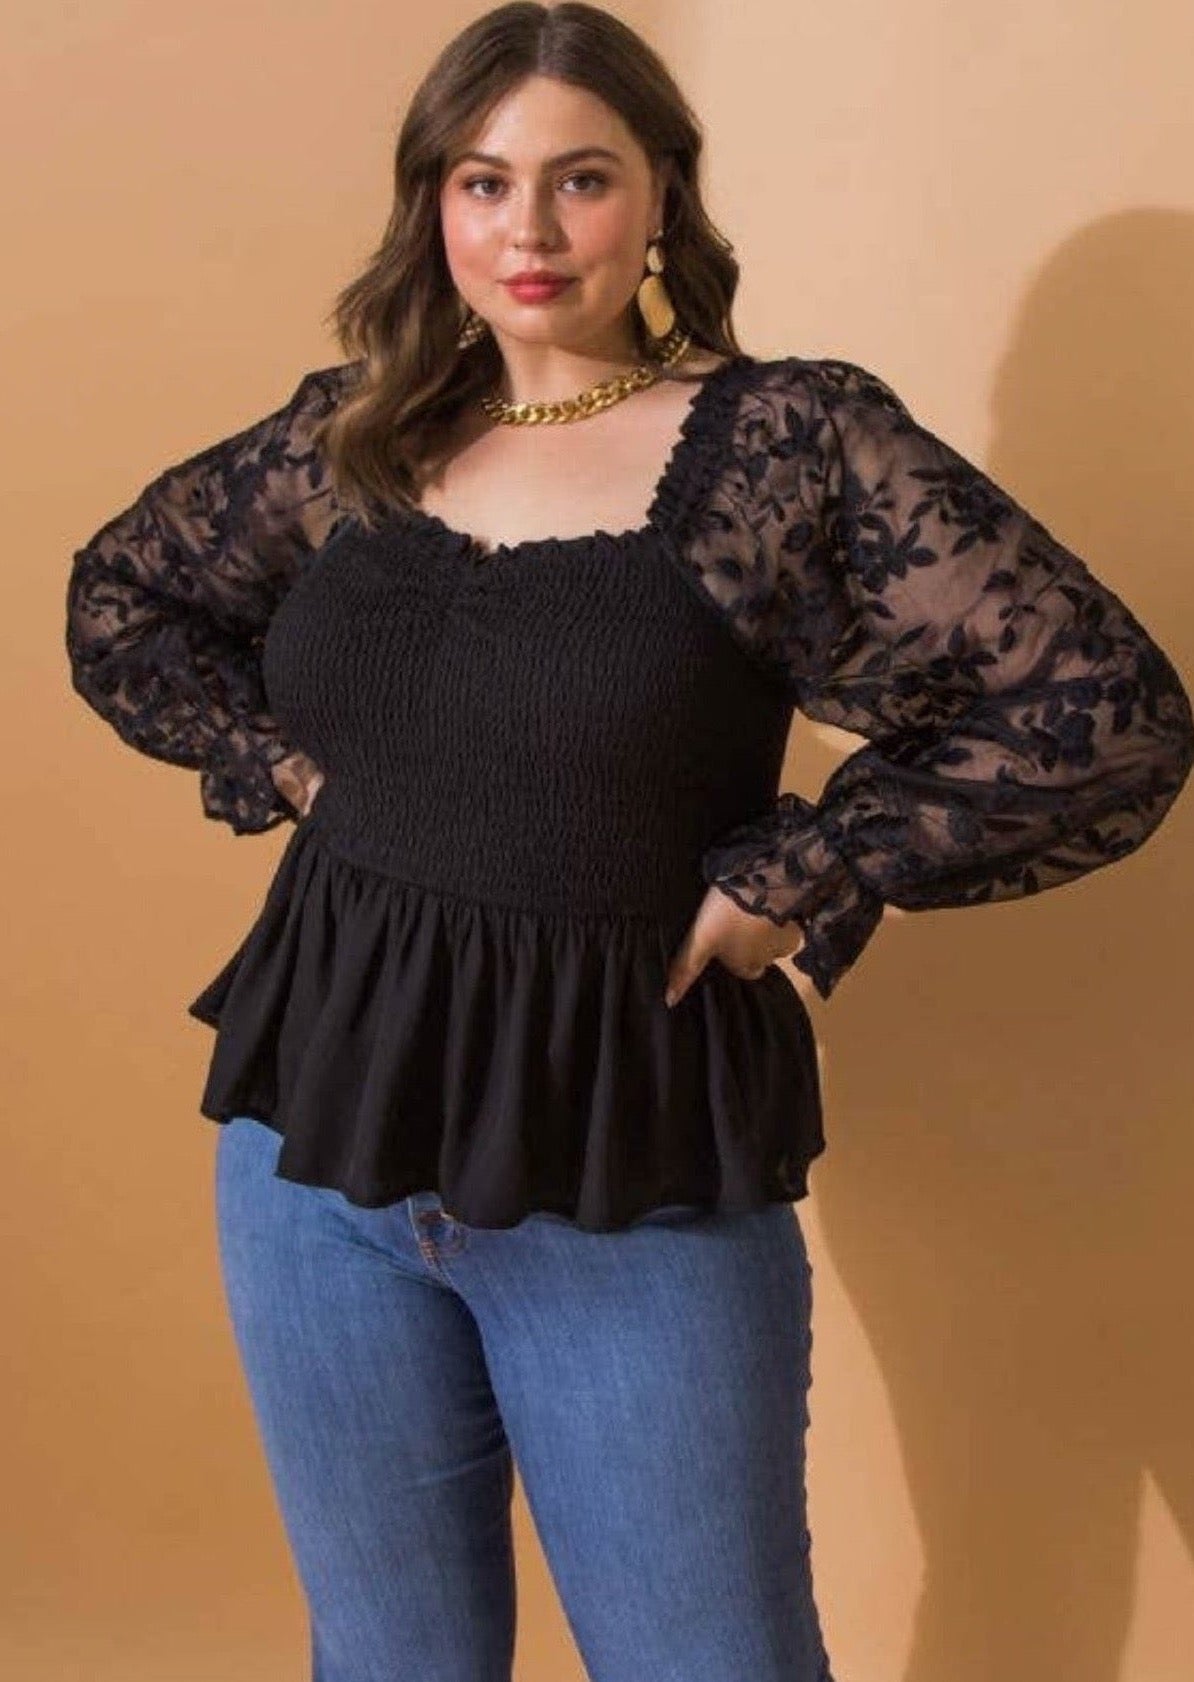 This top features a smocked bodice and square neckline, giving you a flattering fit that's bound to make you the center of attention, with contrasting sleeve with a ruffled cuff and peplum design.